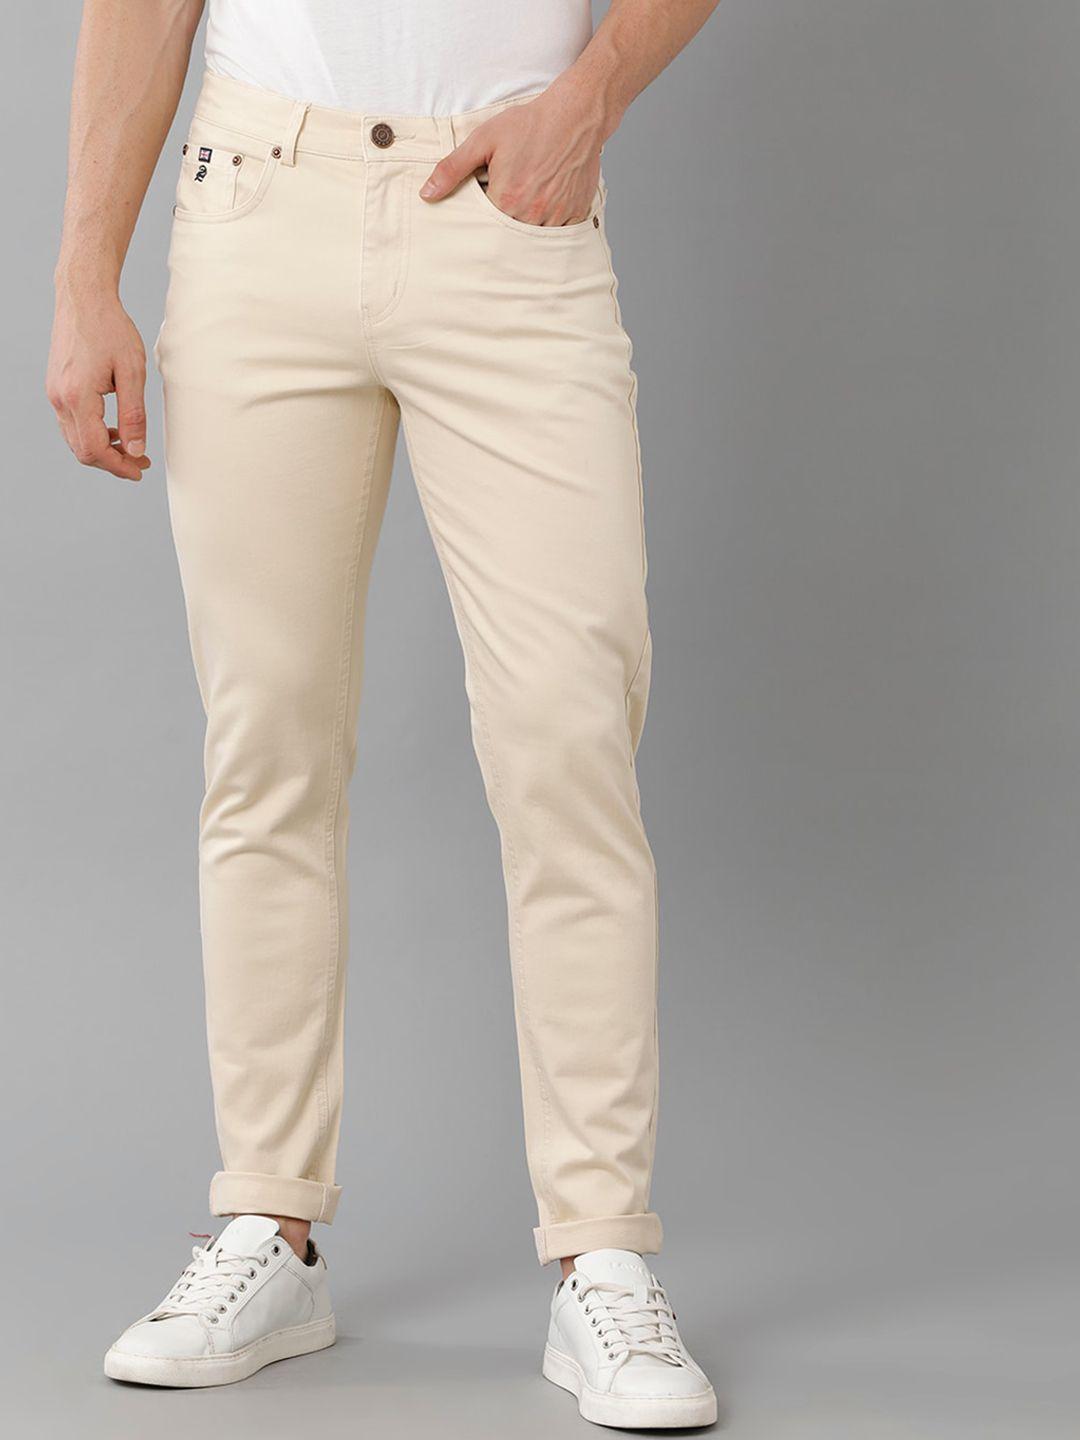 double-two-men-mid-rise-smart-slim-fit-chinos-trousers